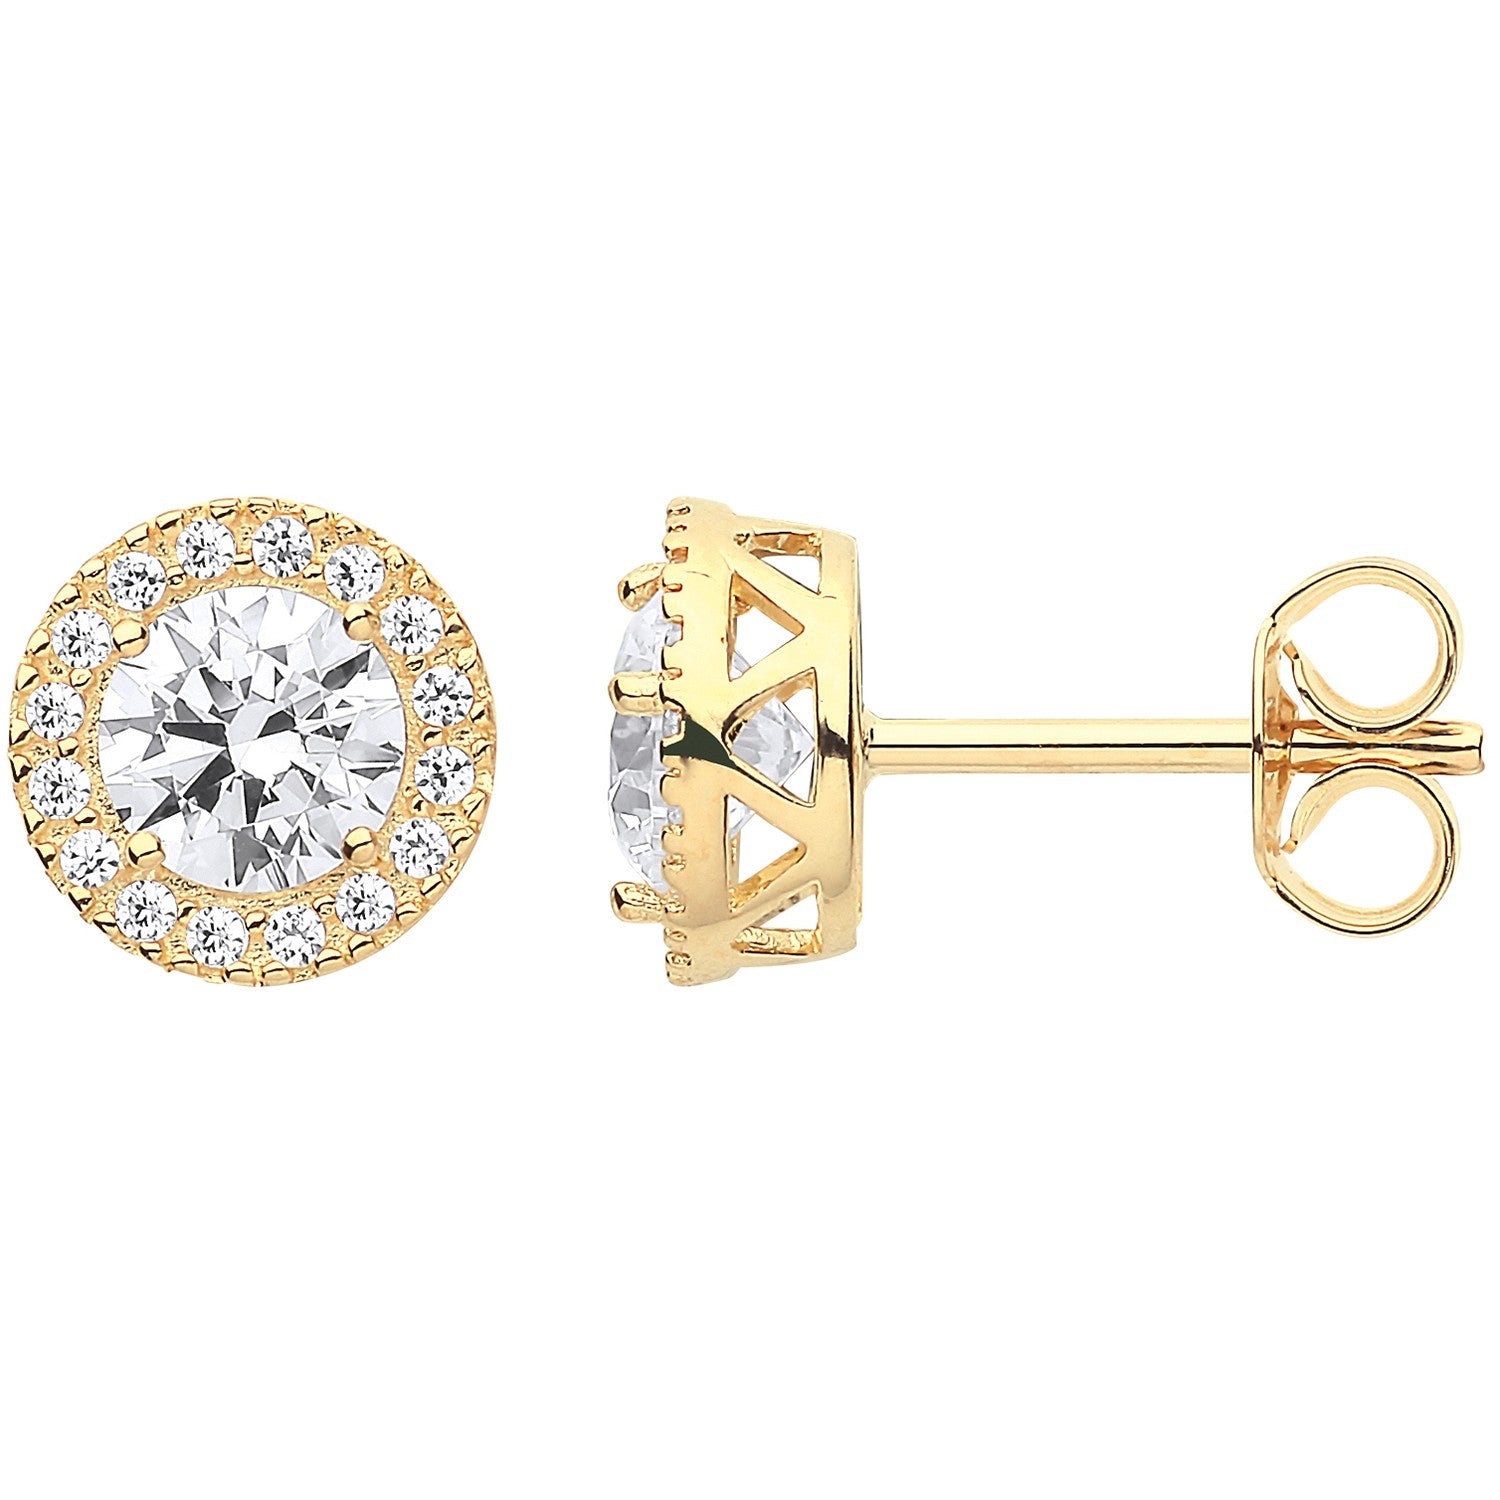 Yellow Gold 8mm Round CZ Halo Stud Earrings